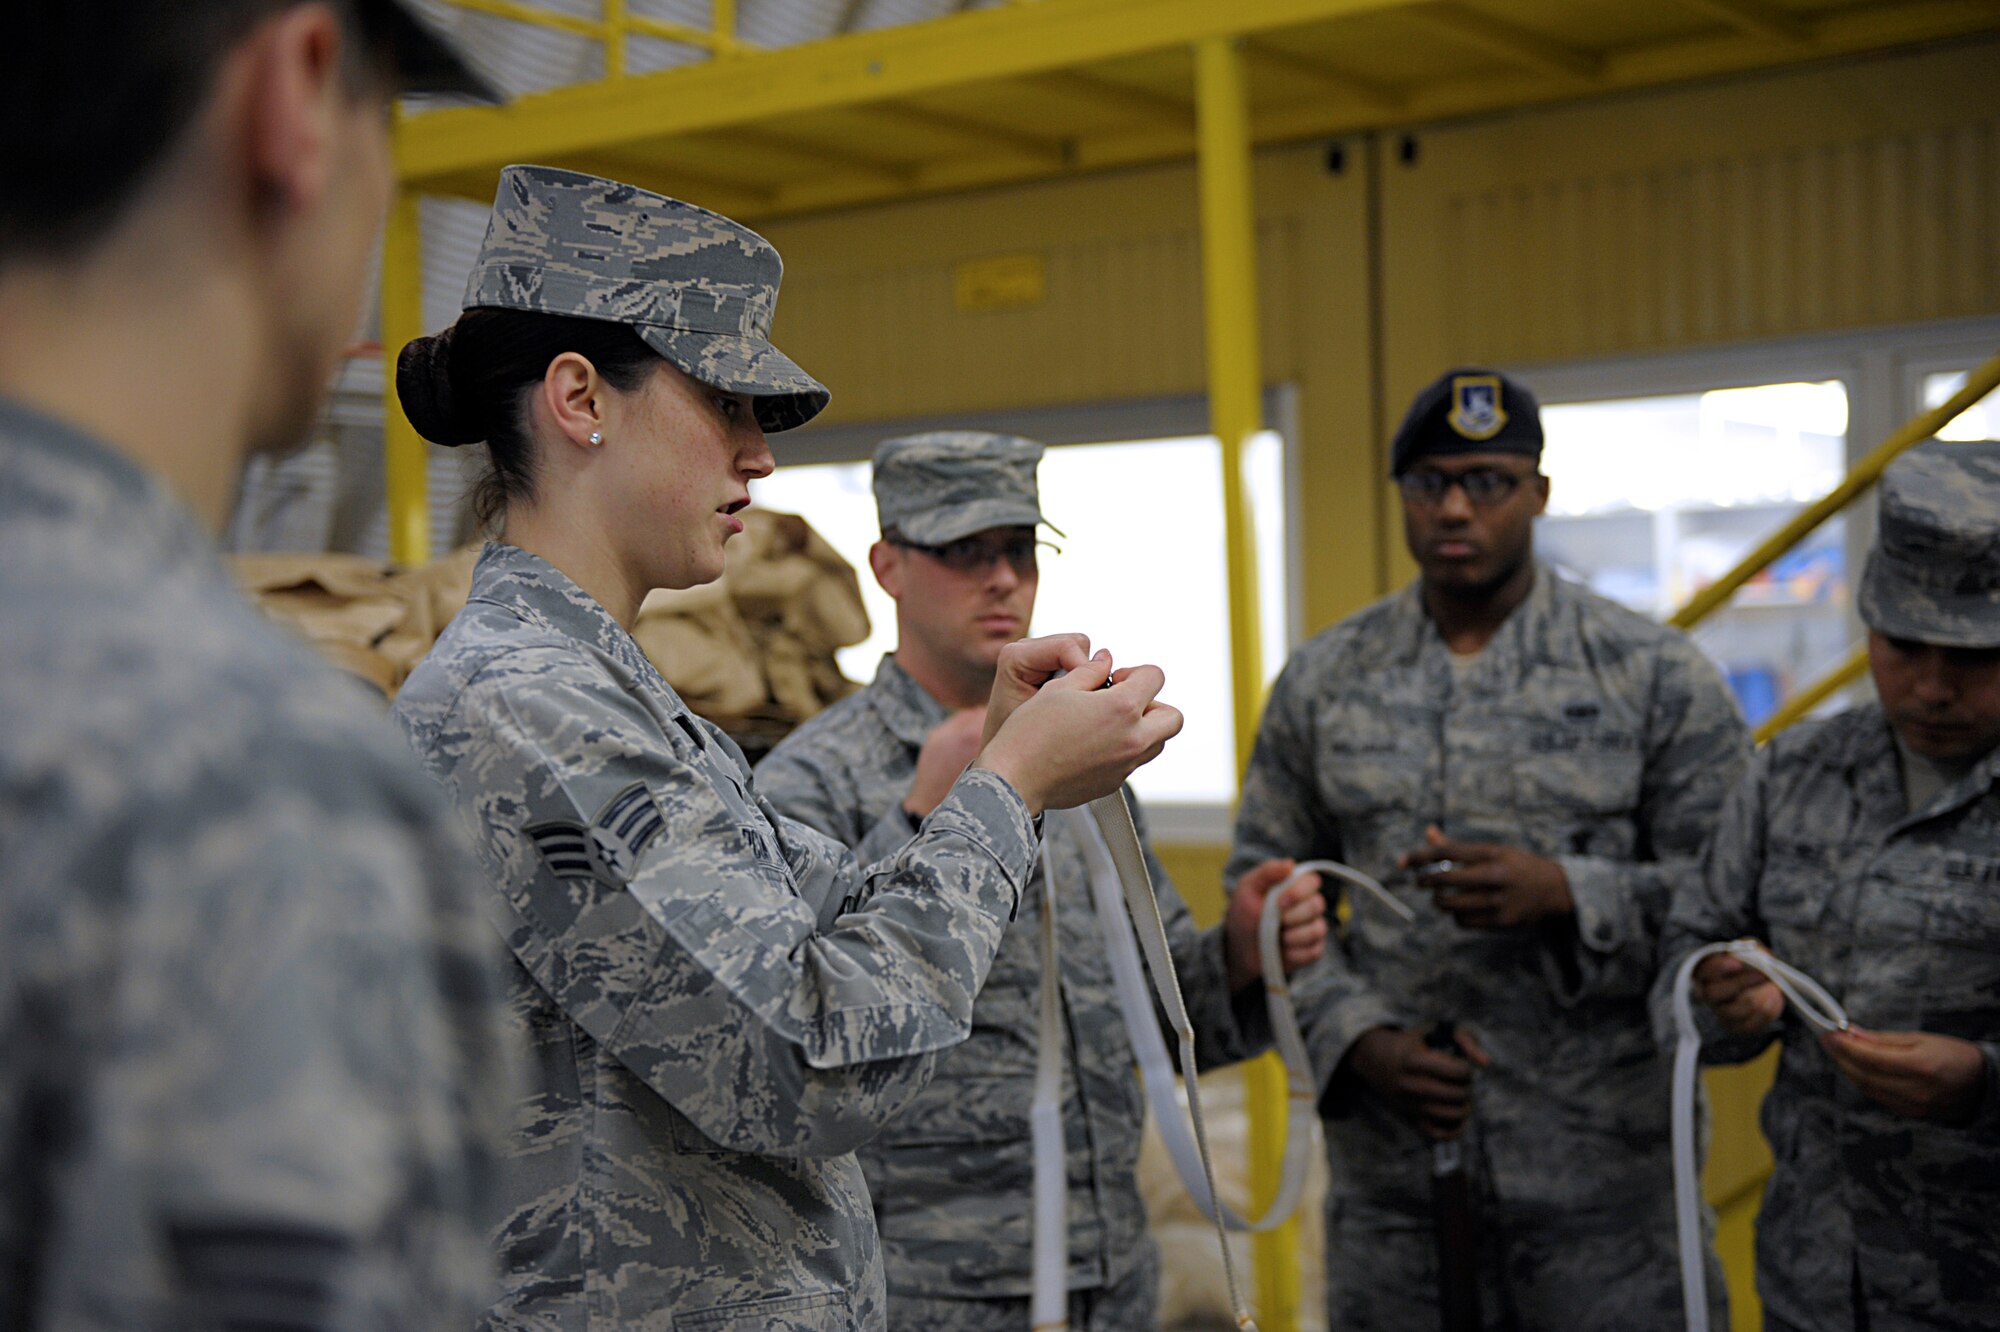 Senior Airman Senior Airman Amber Marcum, U.S. Air Force Honor Guard base honor guard program coordinator, demonstrates to Ramstein Honor Guard members how to ready a strap to attach to a ceremonial rifle March 15, 2016, at Ramstein Air Base, Germany. Members of the U.S. Air Force Honor Guard traveled to Ramstein to instruct base honor guardsmen on techniques to improve their color guard performances. (U.S. Air Force photo/Staff Sgt. Timothy Moore)